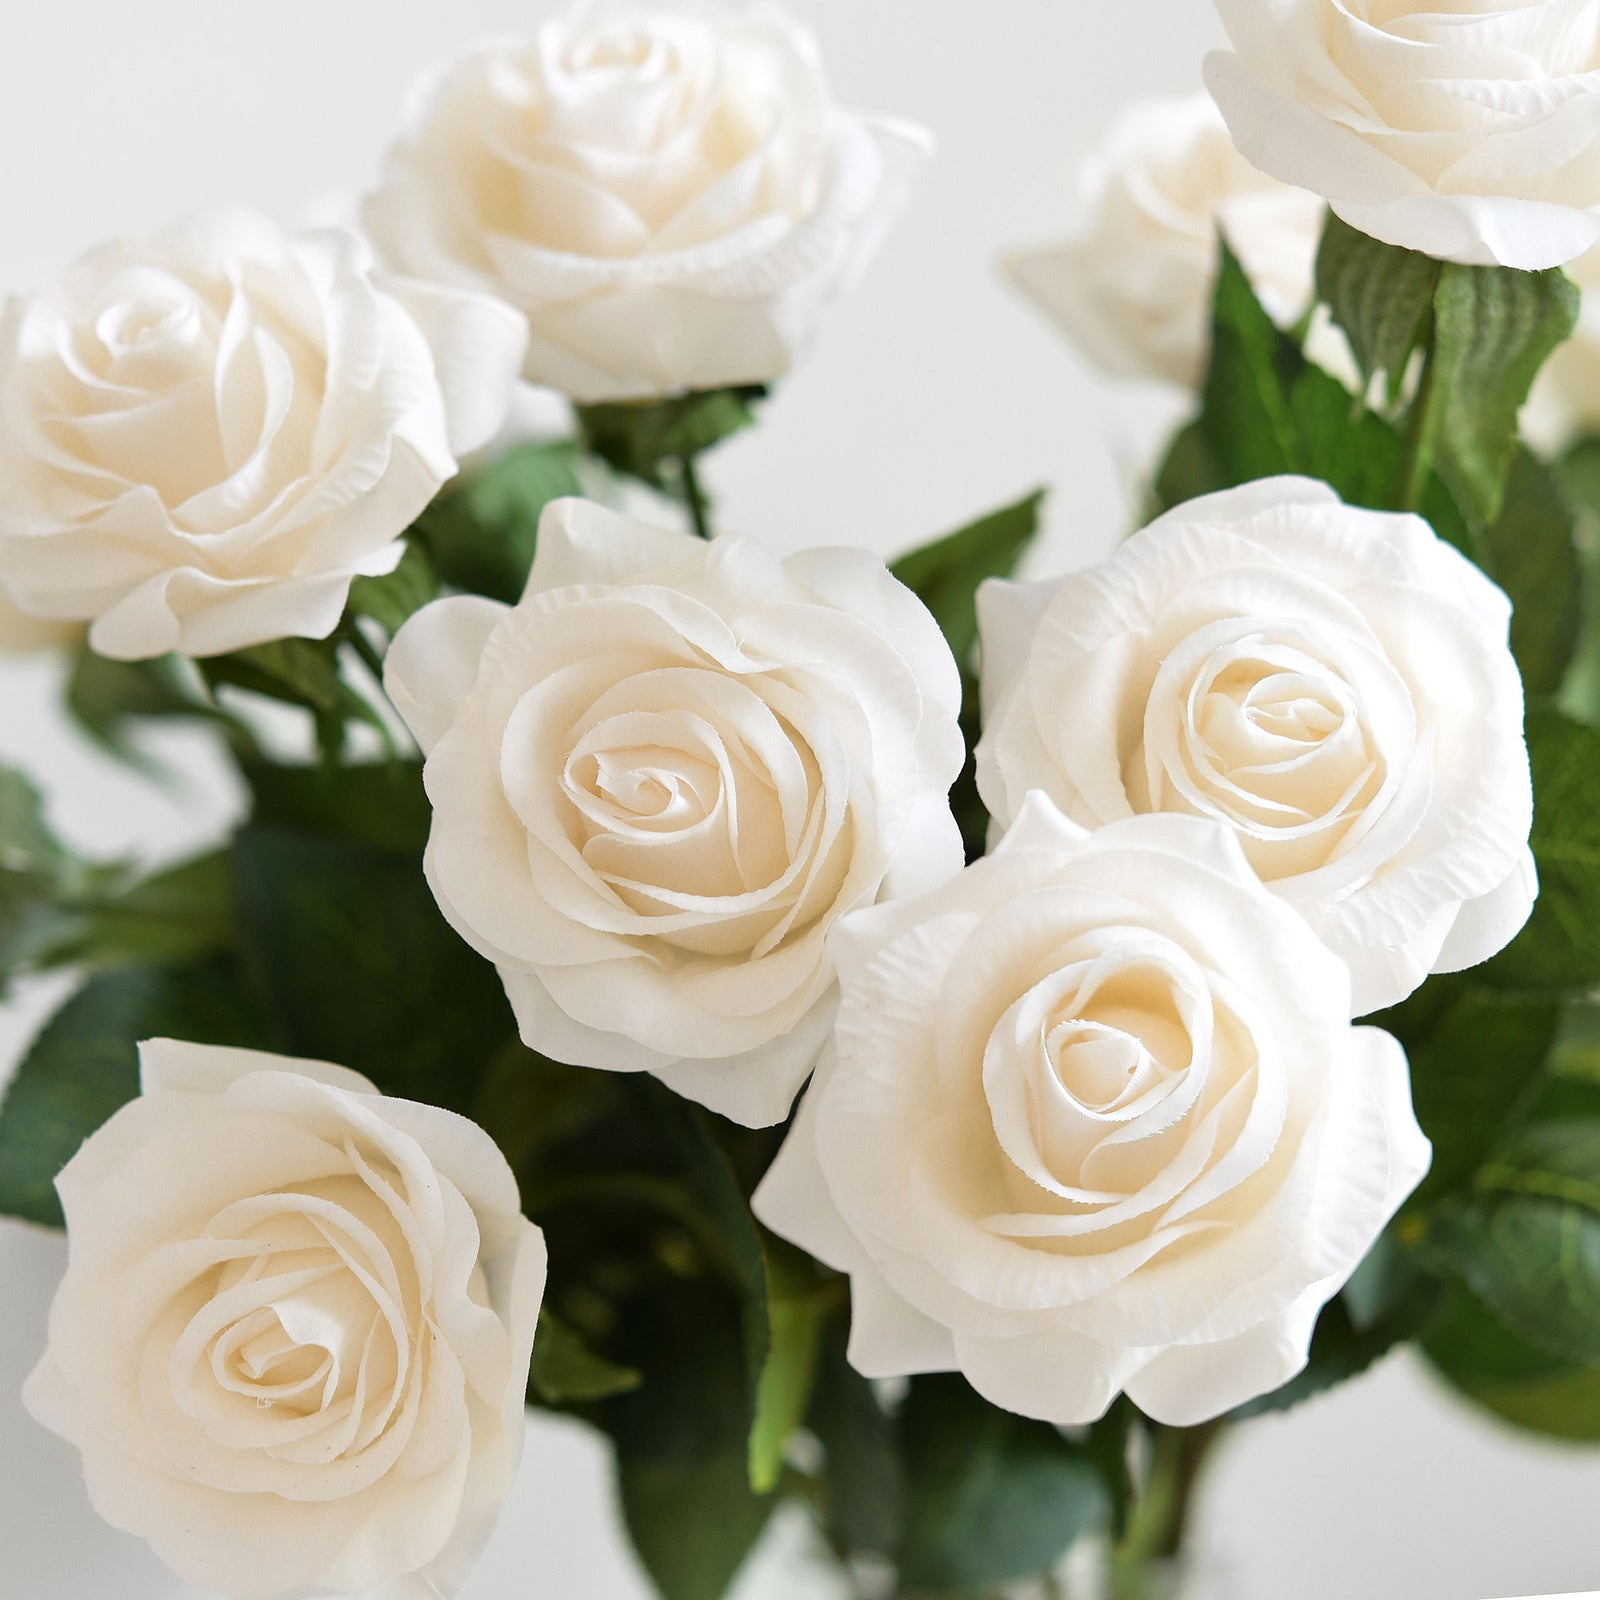 Light Champagne Real Touch Roses Silk Artificial Flowers ‘Petals Feel and Look like Fresh Roses' Wedding, Bridal, Home Décor